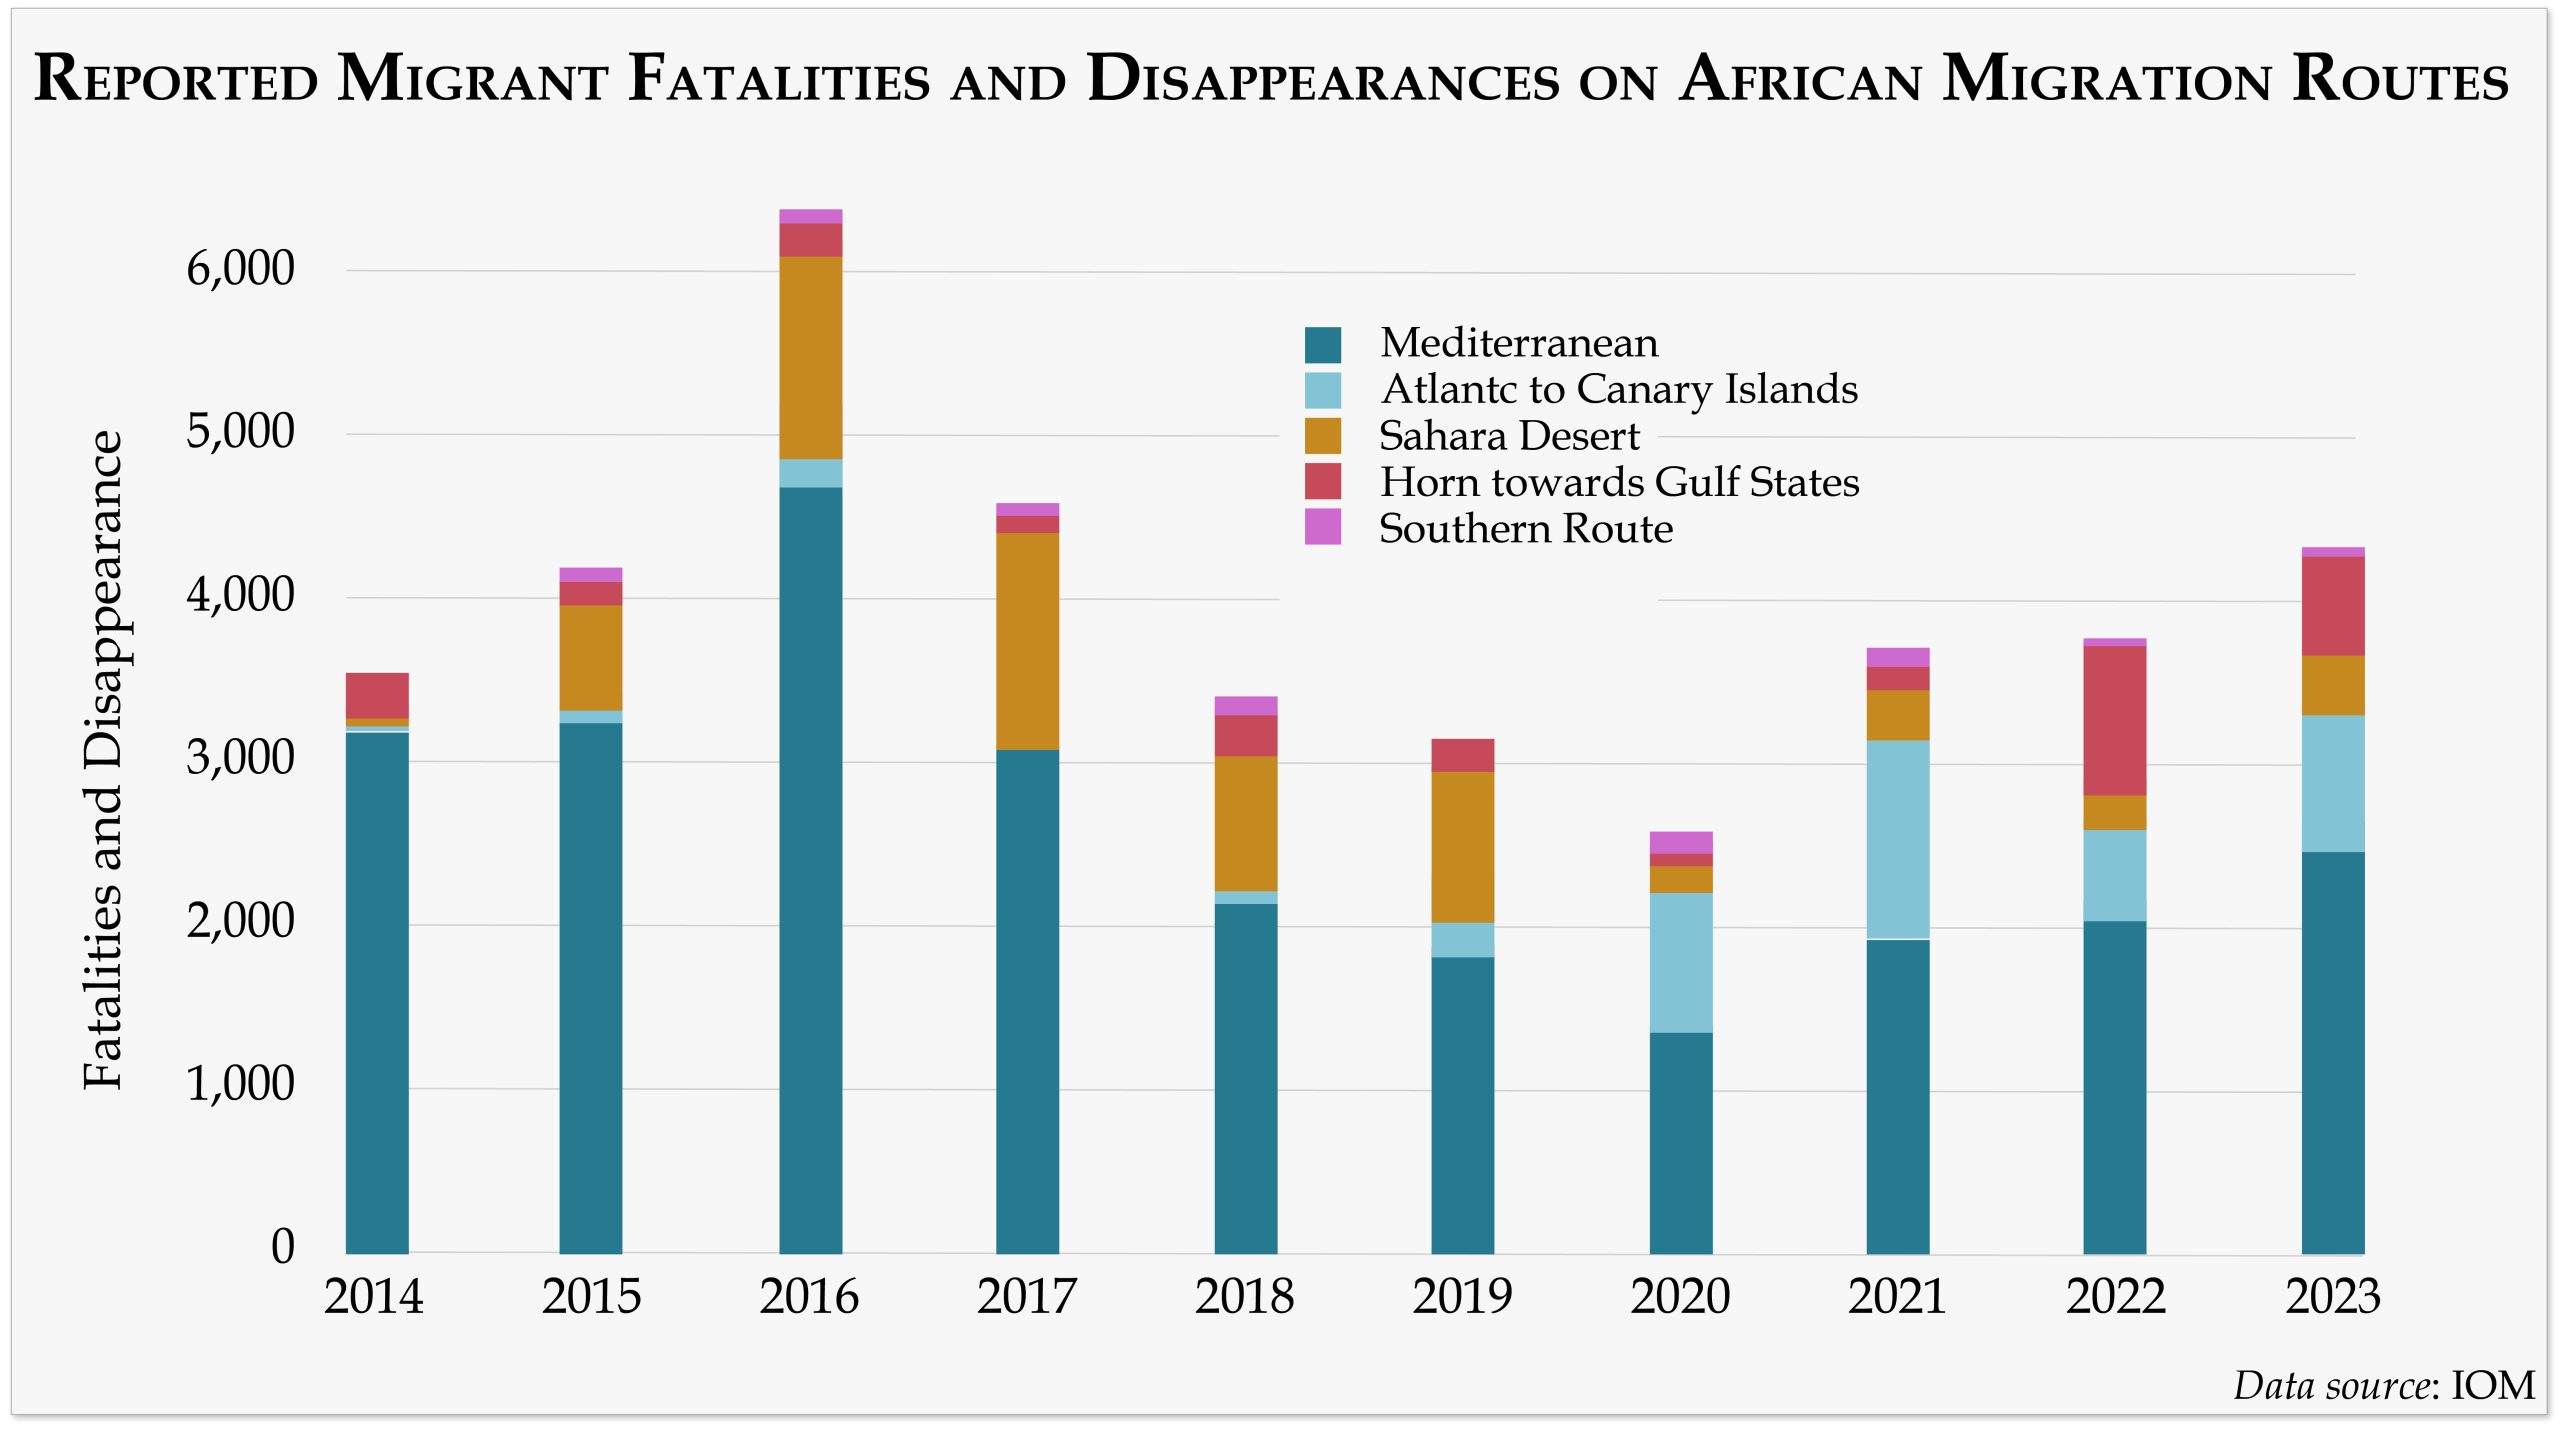 Reported migrant fatalities and disappearances on African migration routes